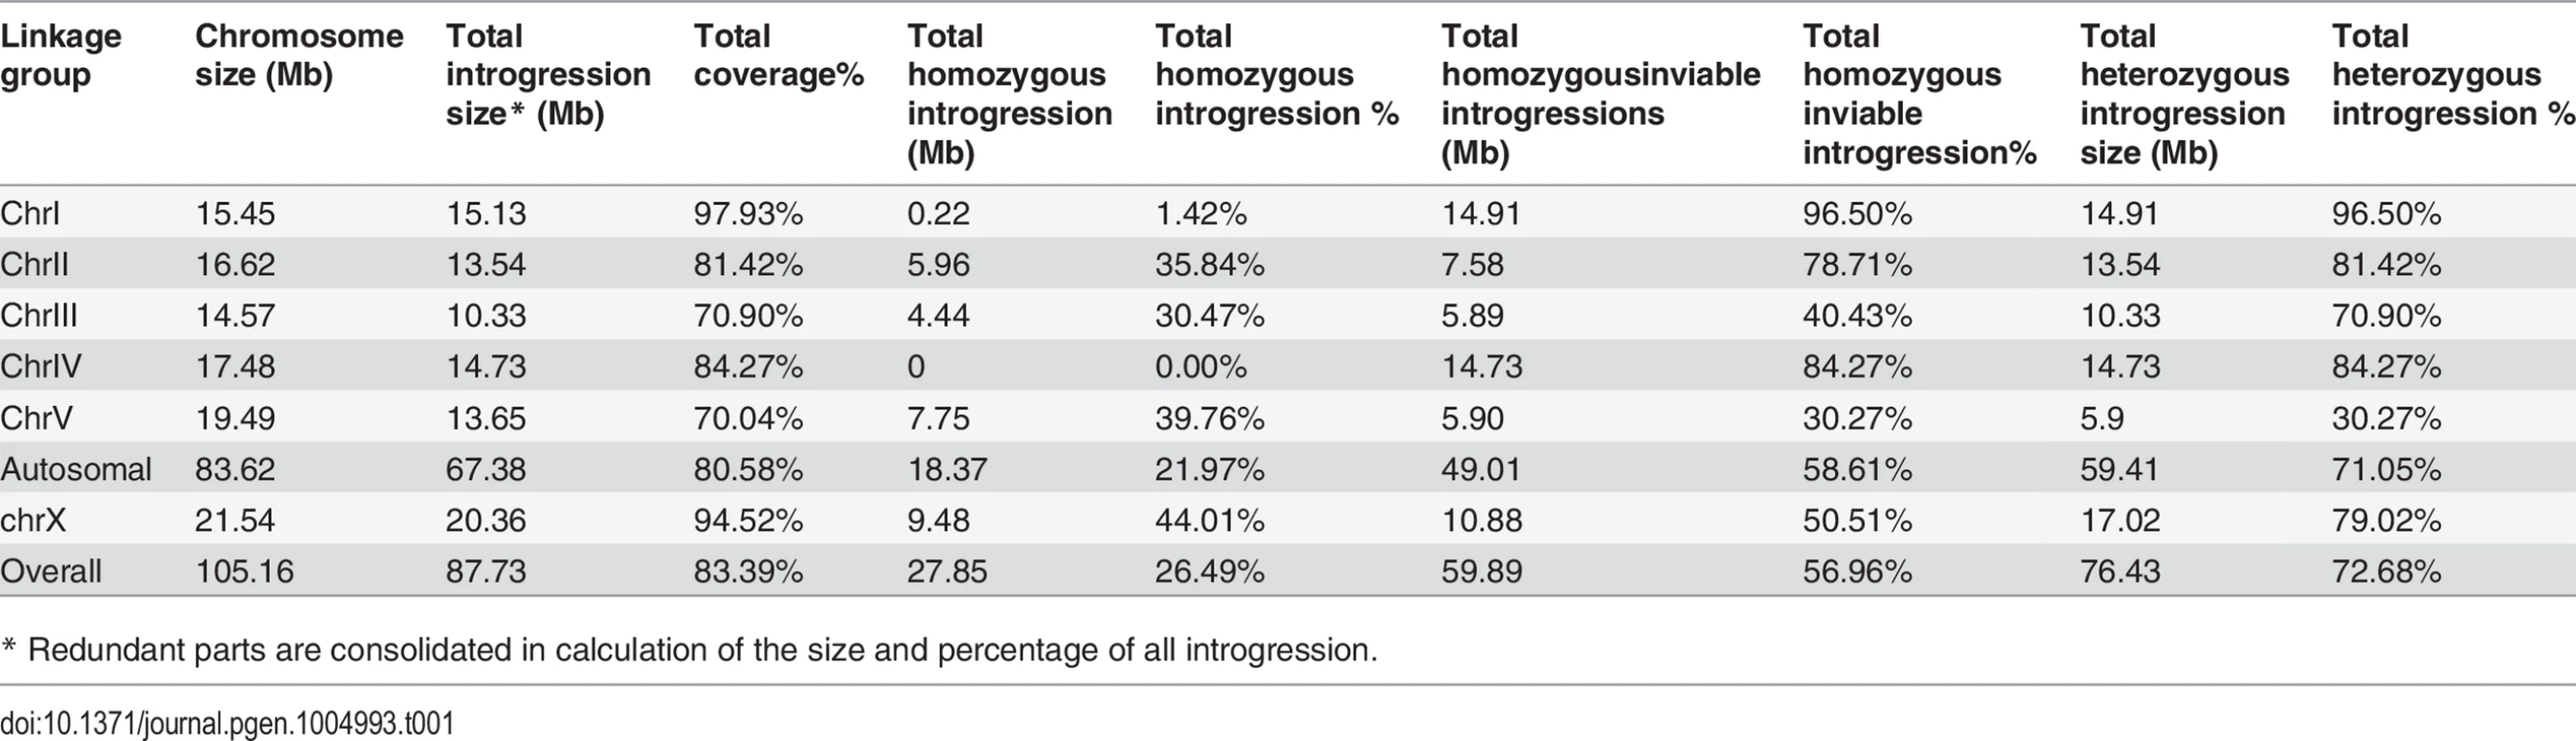 Coverage statistics for introgressions along with its homozygous viability based on the “cb4” assembly of <i>C. briggsae</i> genome.